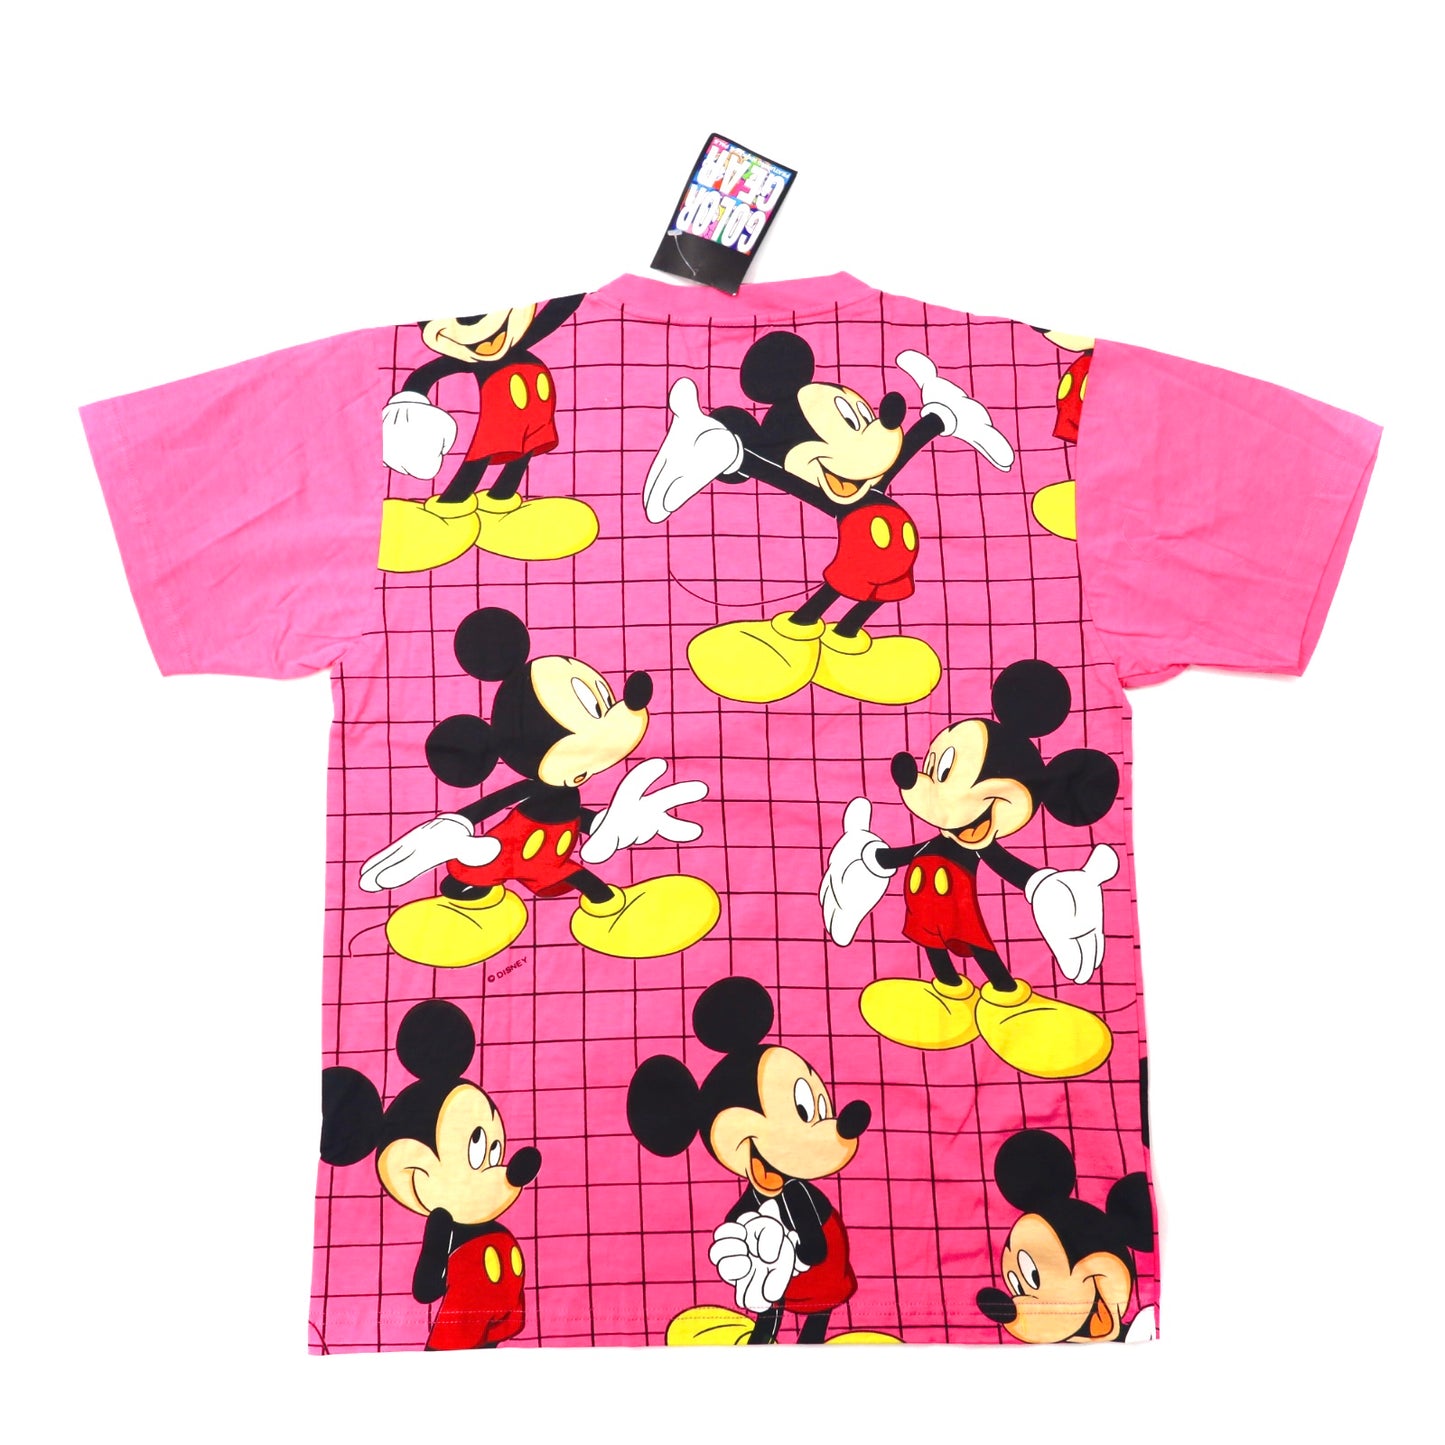 COLOR GEAR Tシャツ XL ピンク MICKEY MOUSE ビッグサイズ 未使用品